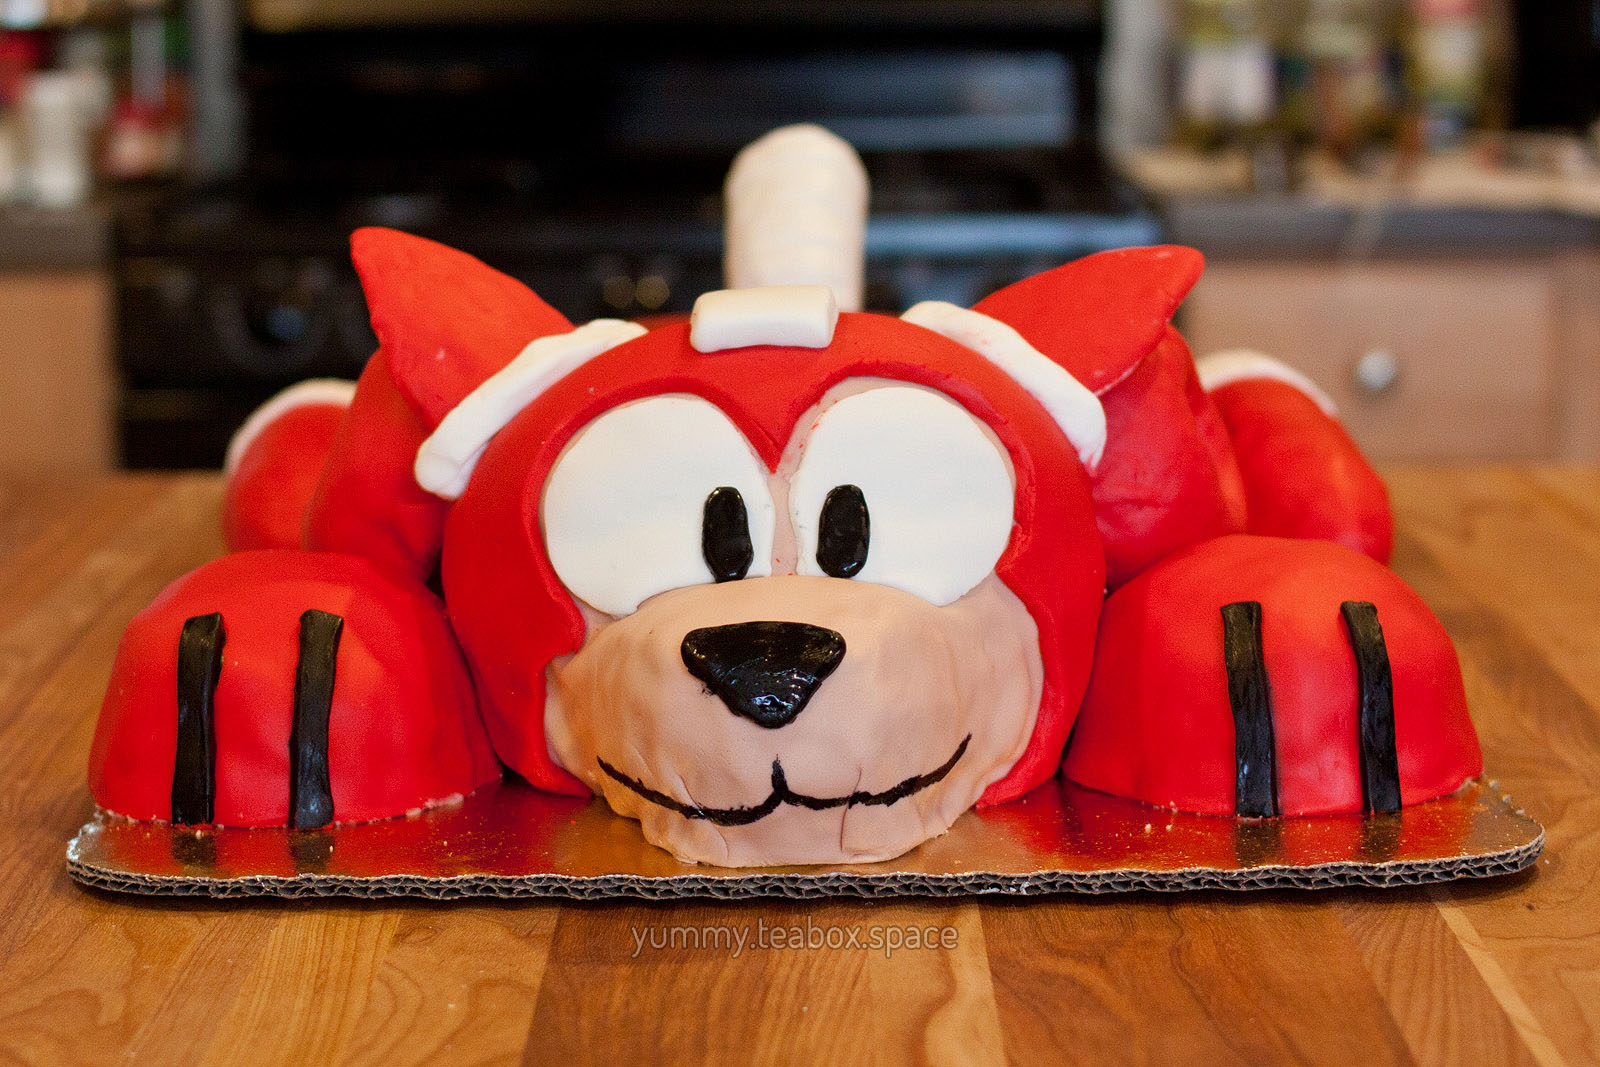 Front view of a cake that looks like the red robot dog, Rush, from Mega Man